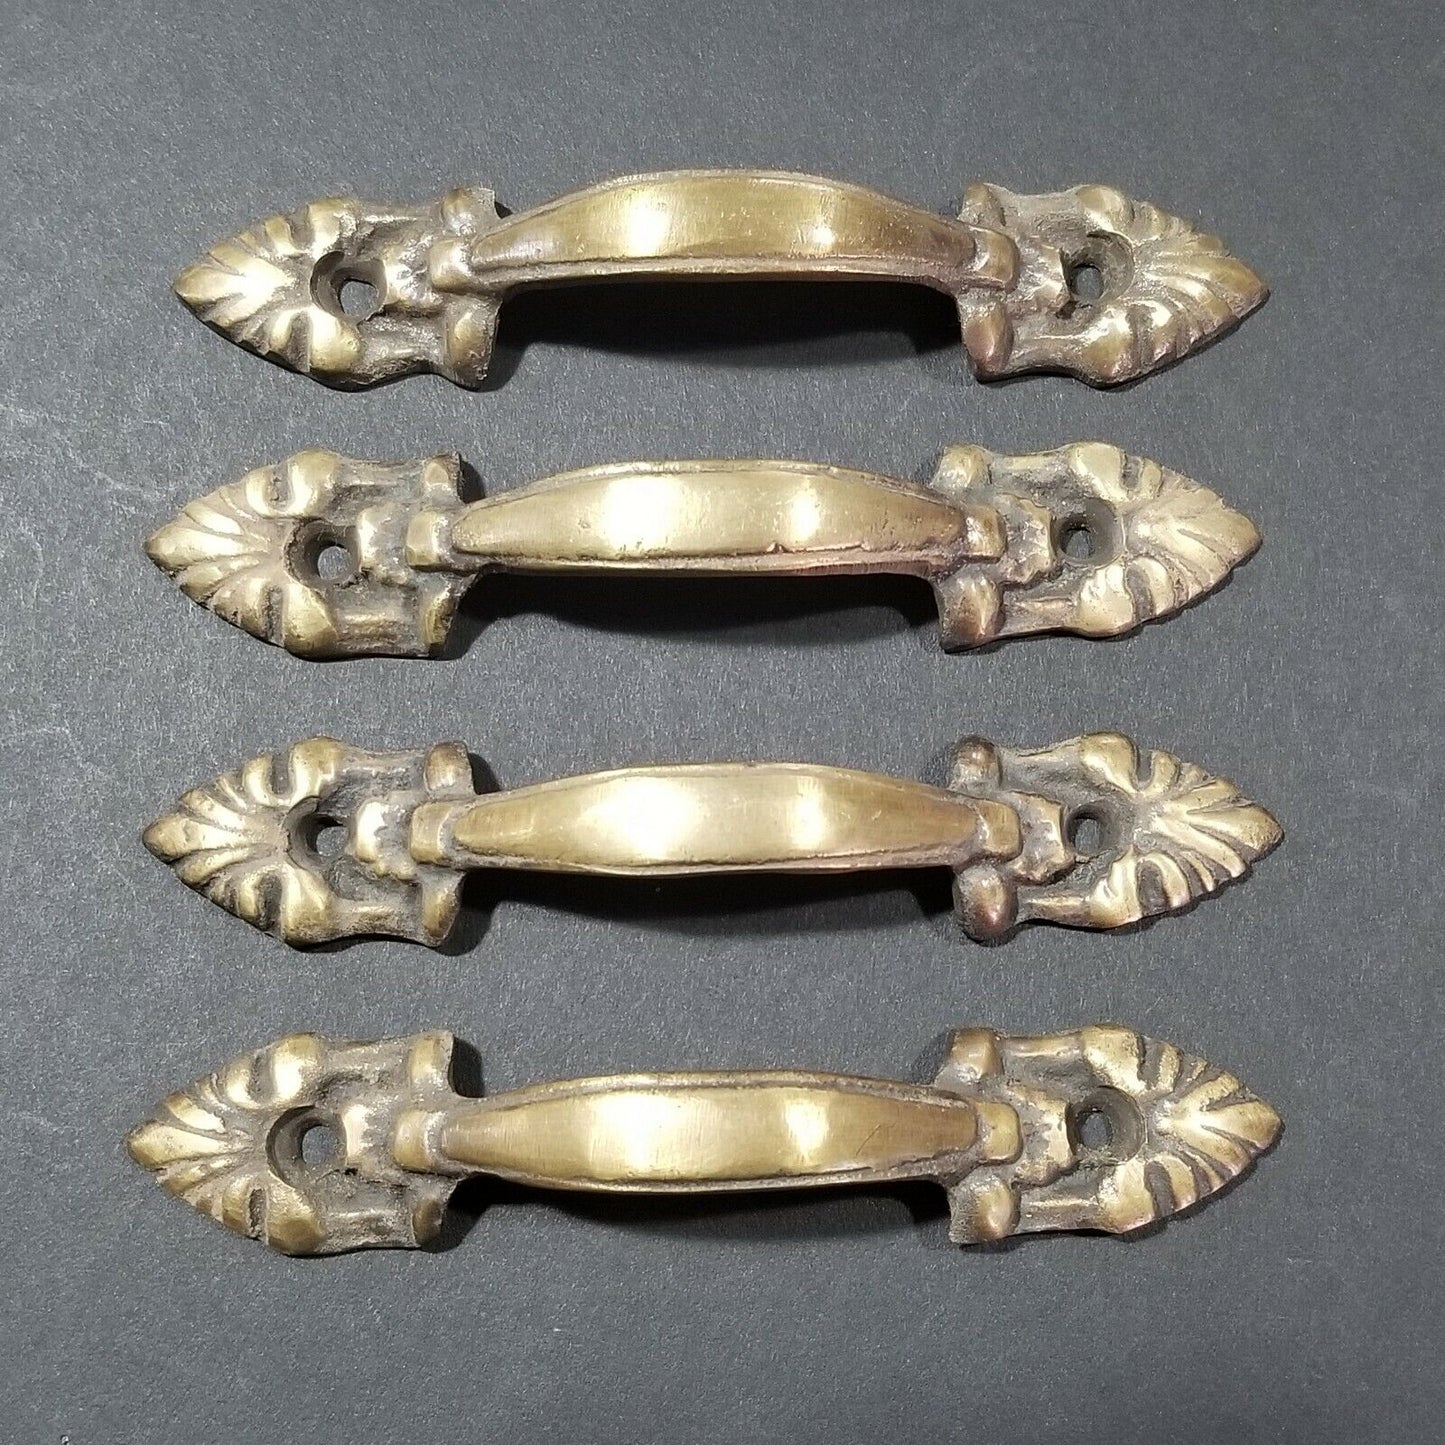 4 x  French Ornate Cabinet Drawer Pull Handles  4-3/8" long solid brass #P4